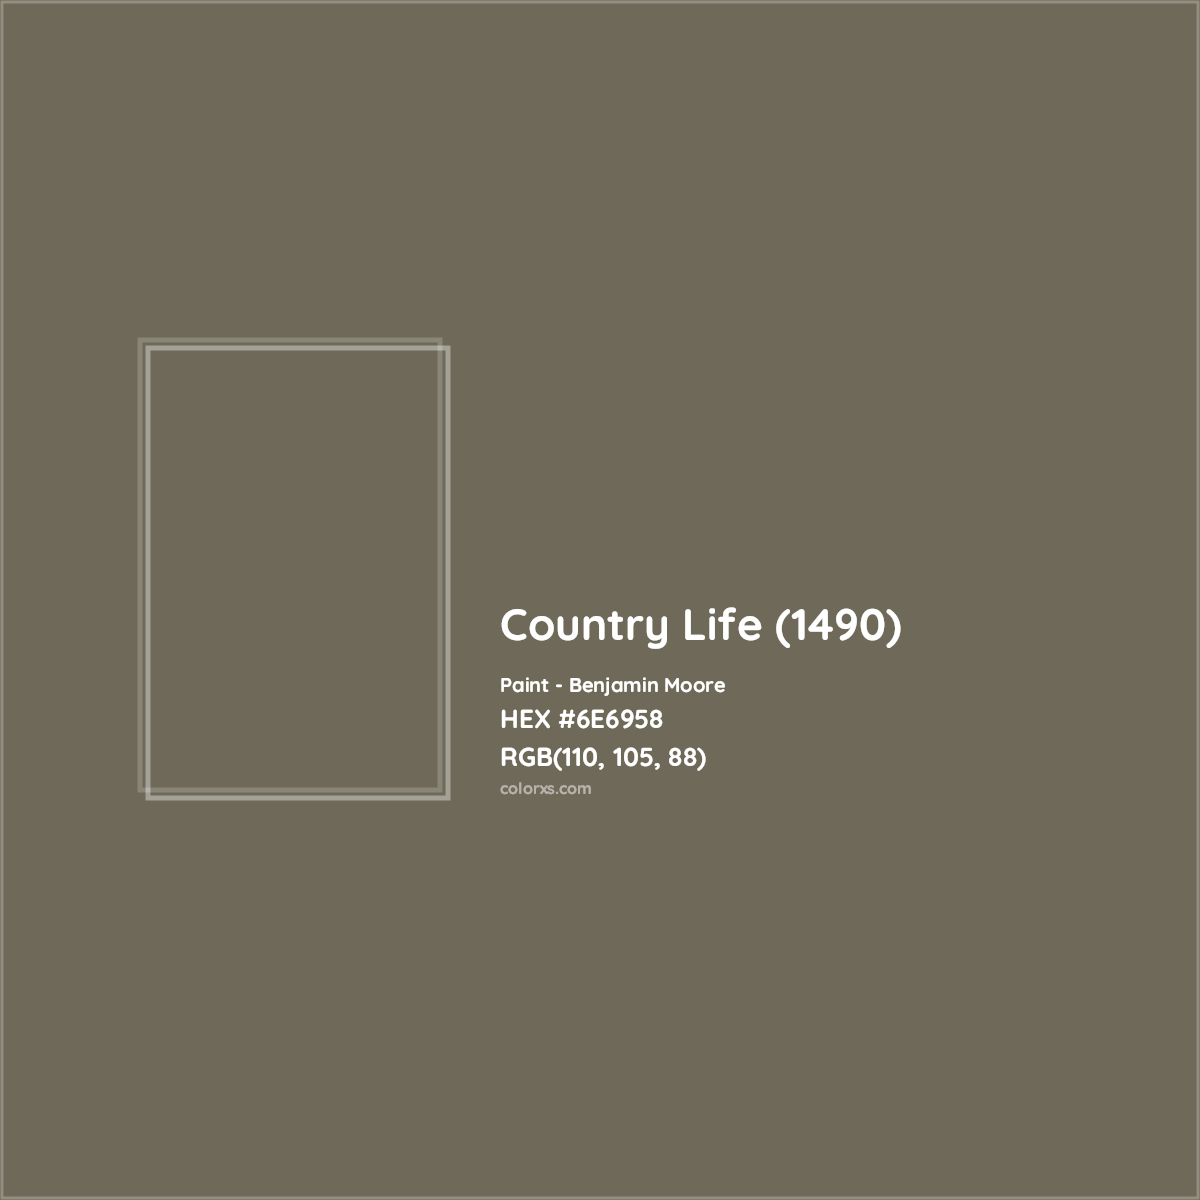 HEX #6E6958 Country Life (1490) Paint Benjamin Moore - Color Code